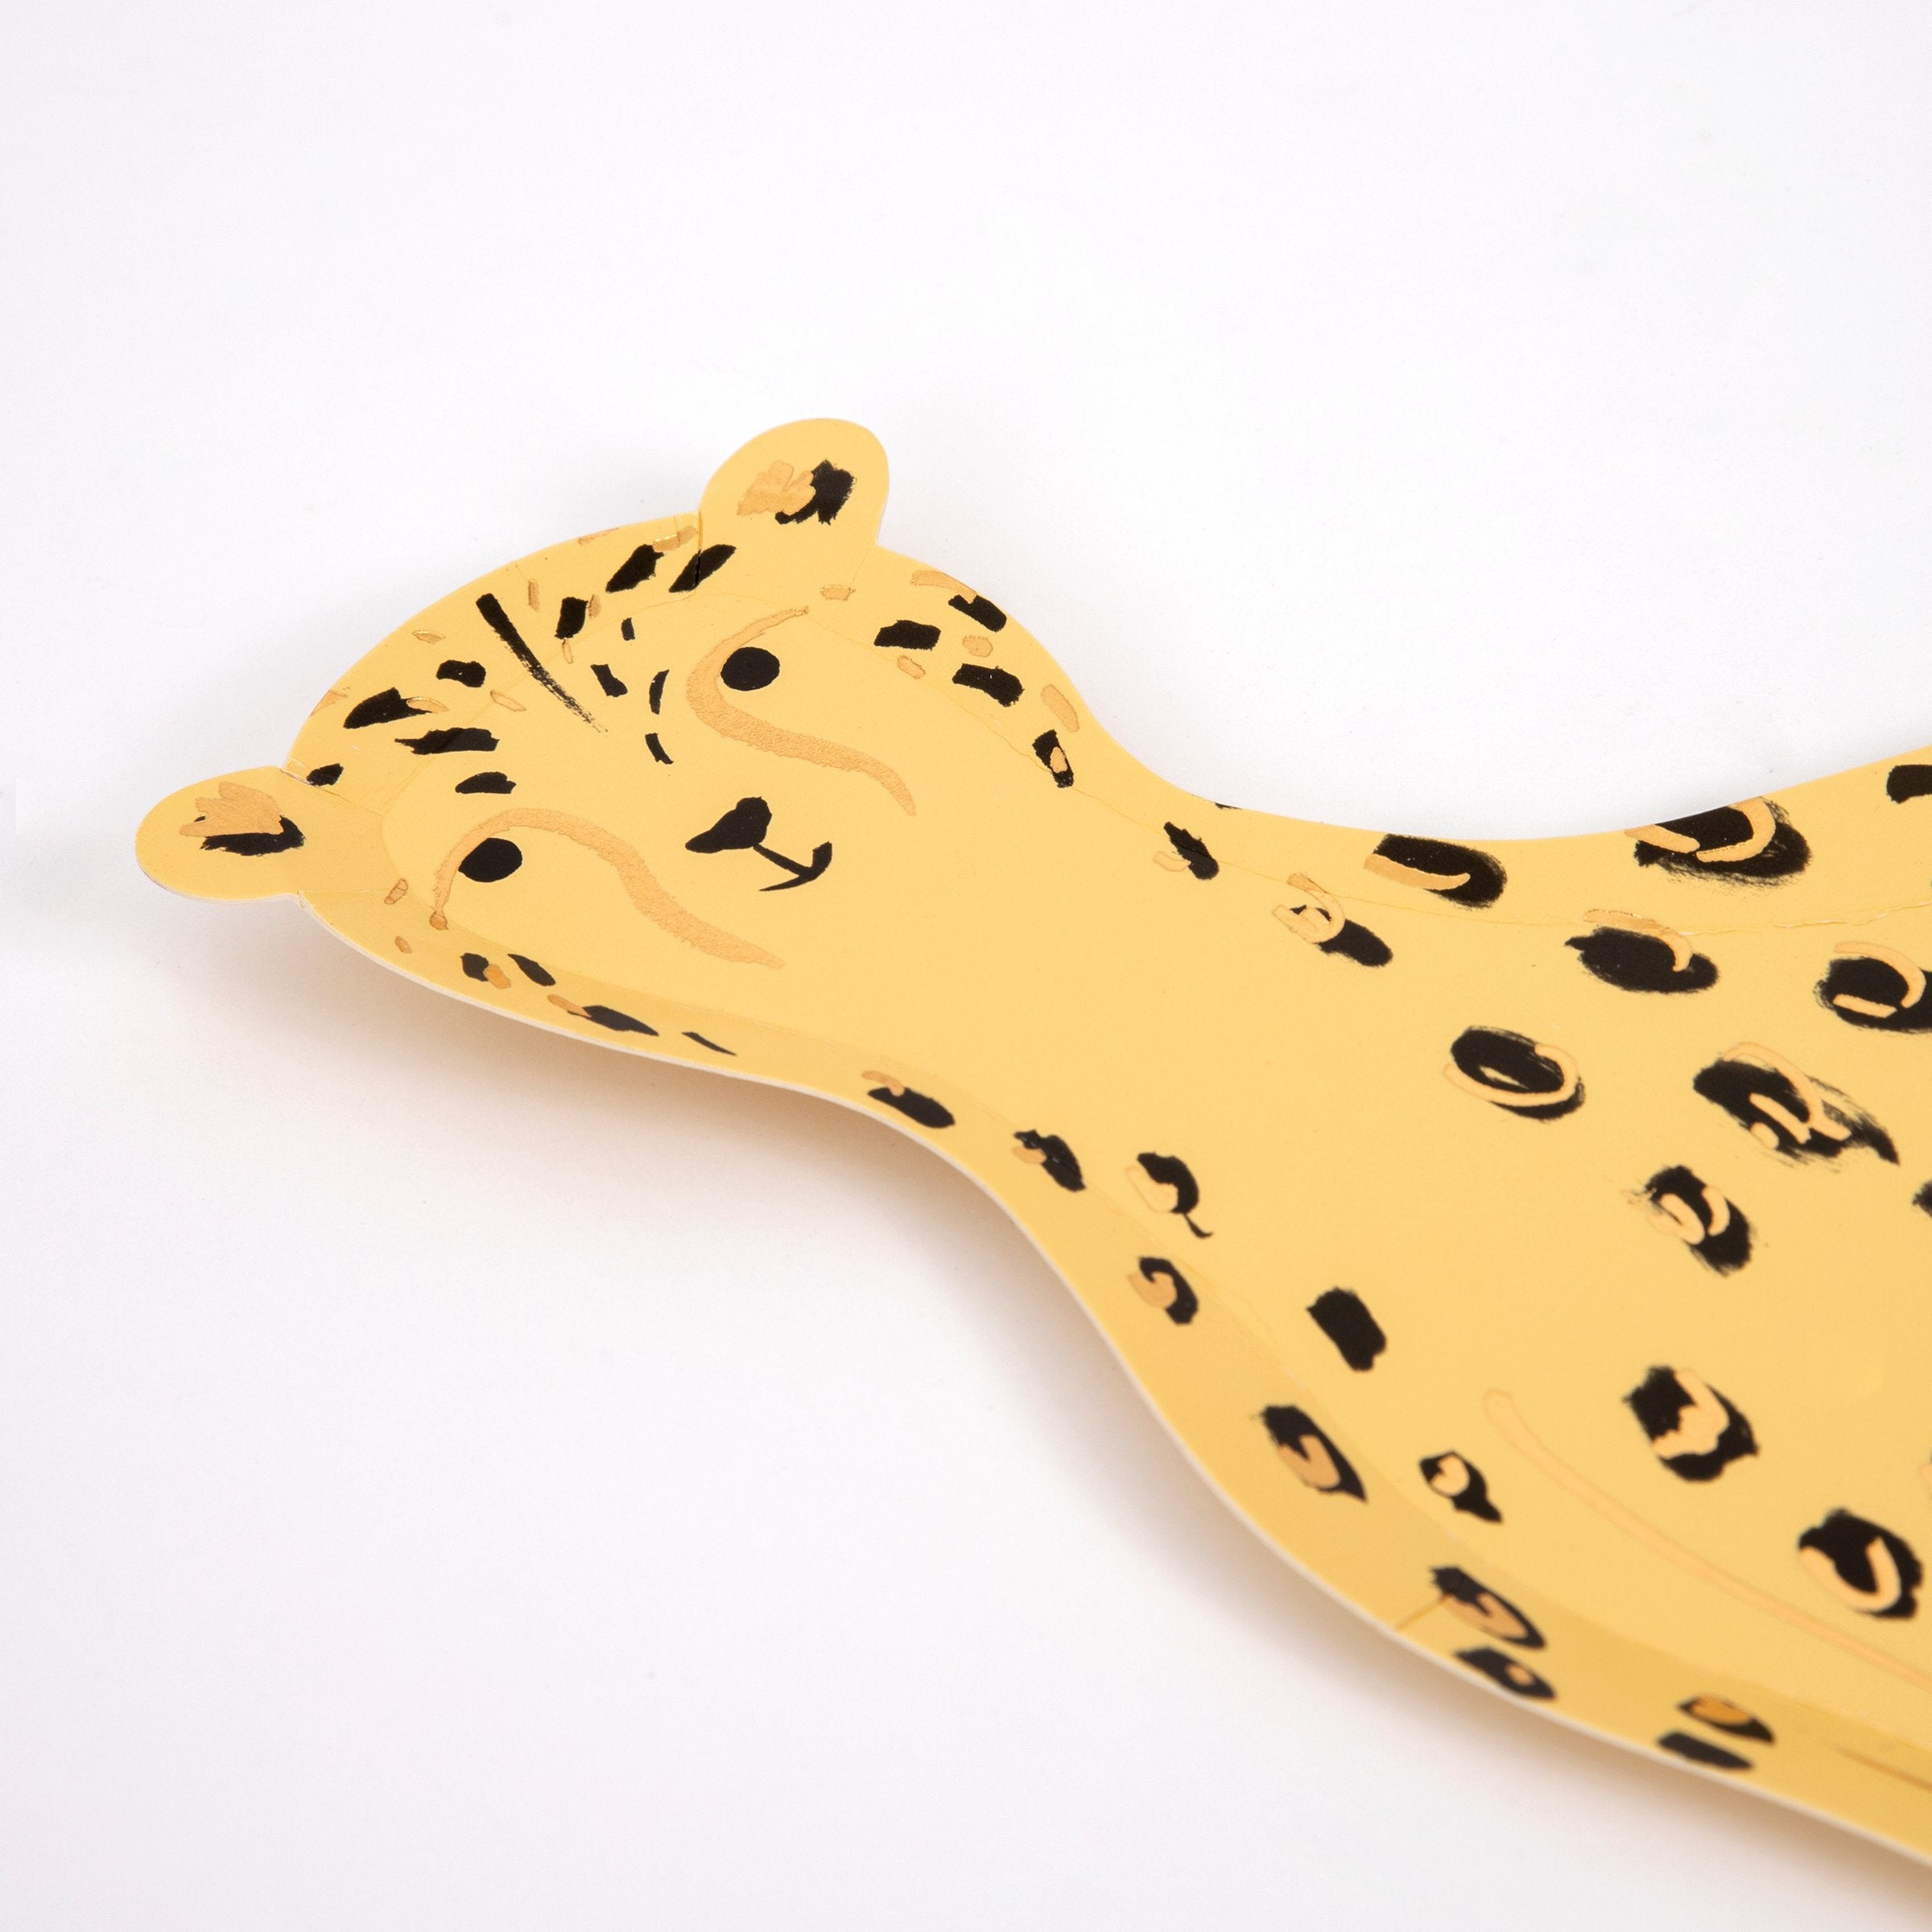 Our cheetah plates feature shiny gold foil detail, perfect for a stylish safari party.